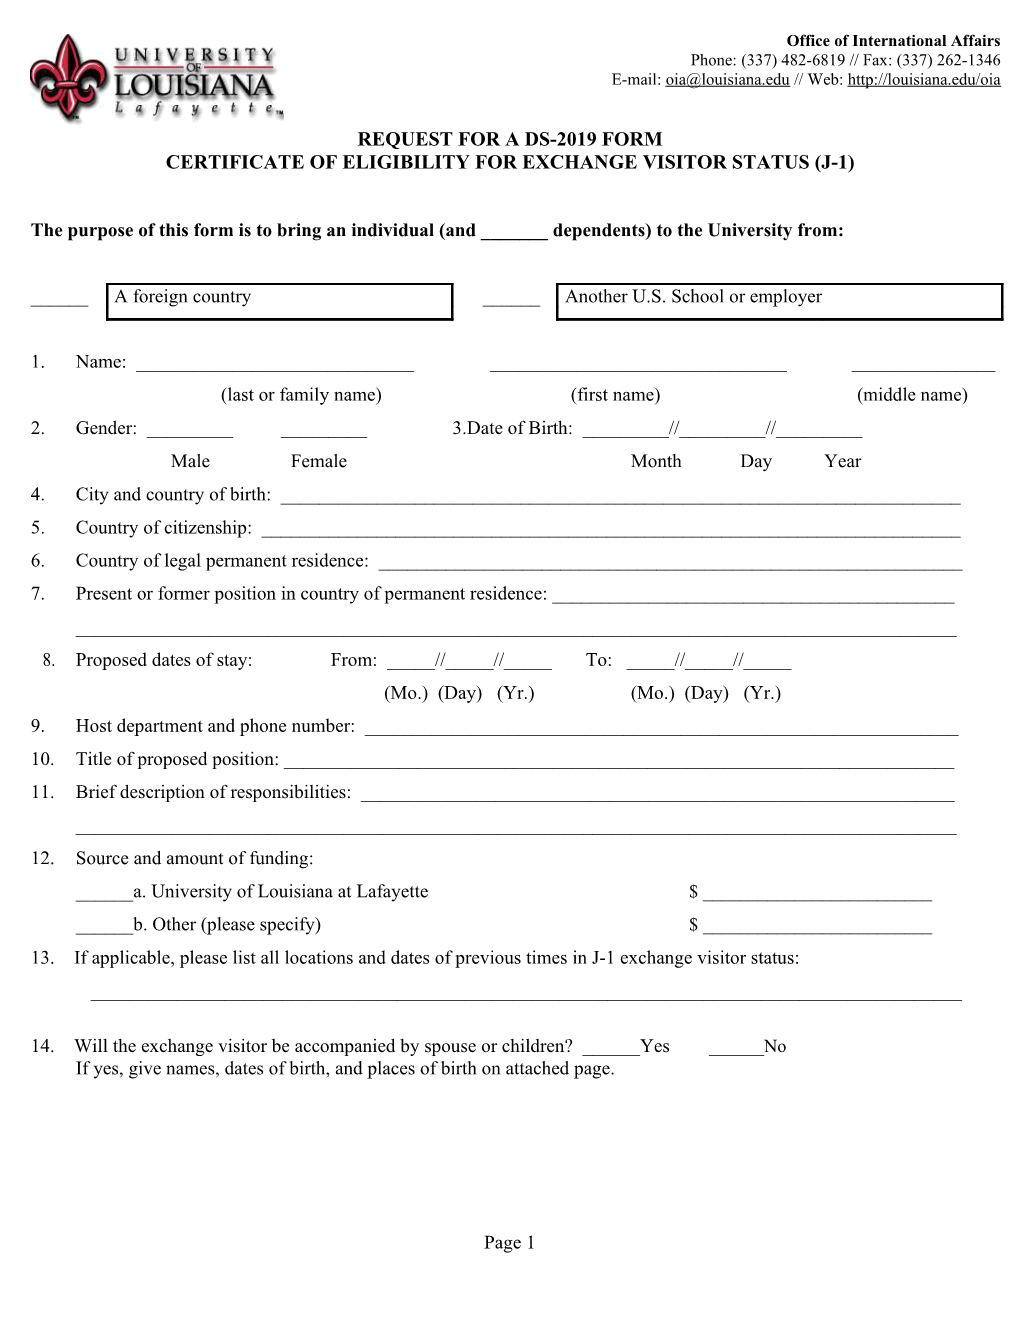 Certificate of Eligibility for Exchange Visitor Status (J-1)